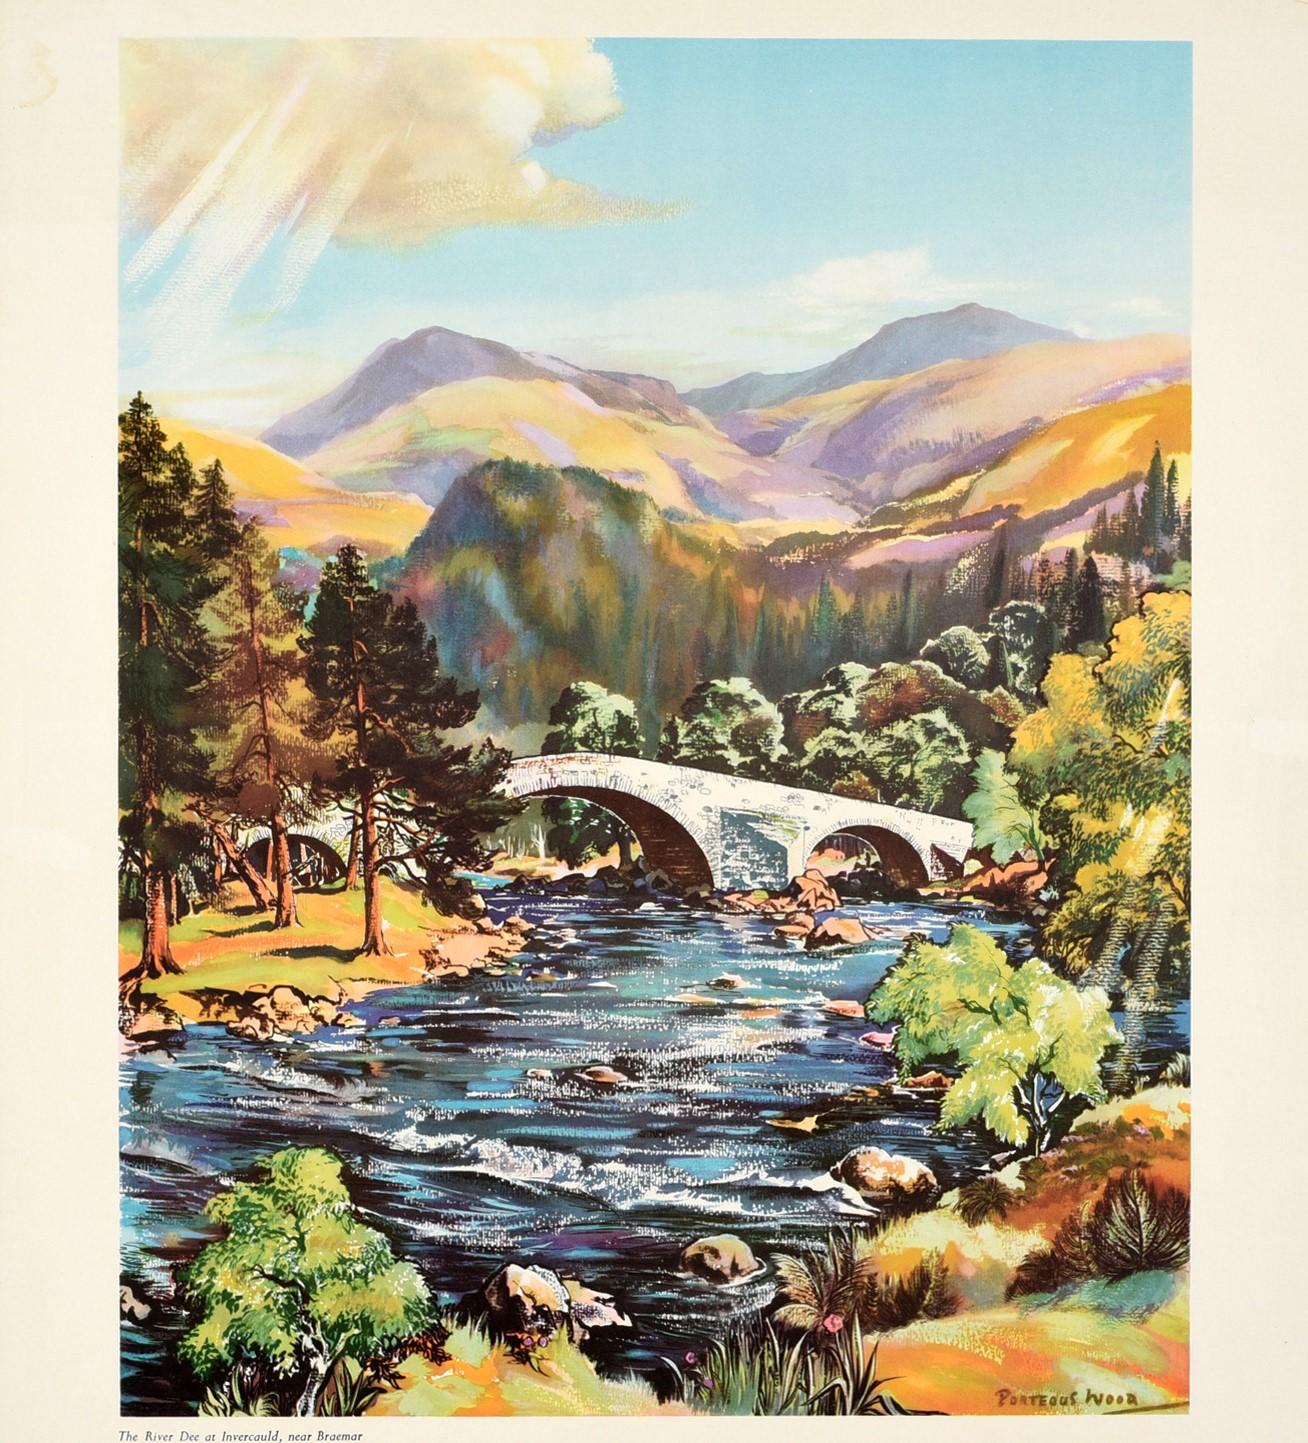 Original vintage travel advertising poster for Scotland Where You Are Always Welcome featuring a colourful scenic painting by the watercolour artist and designer James Porteous Wood (1919-2005) depicting The River Dee at Invercauld near Braemar